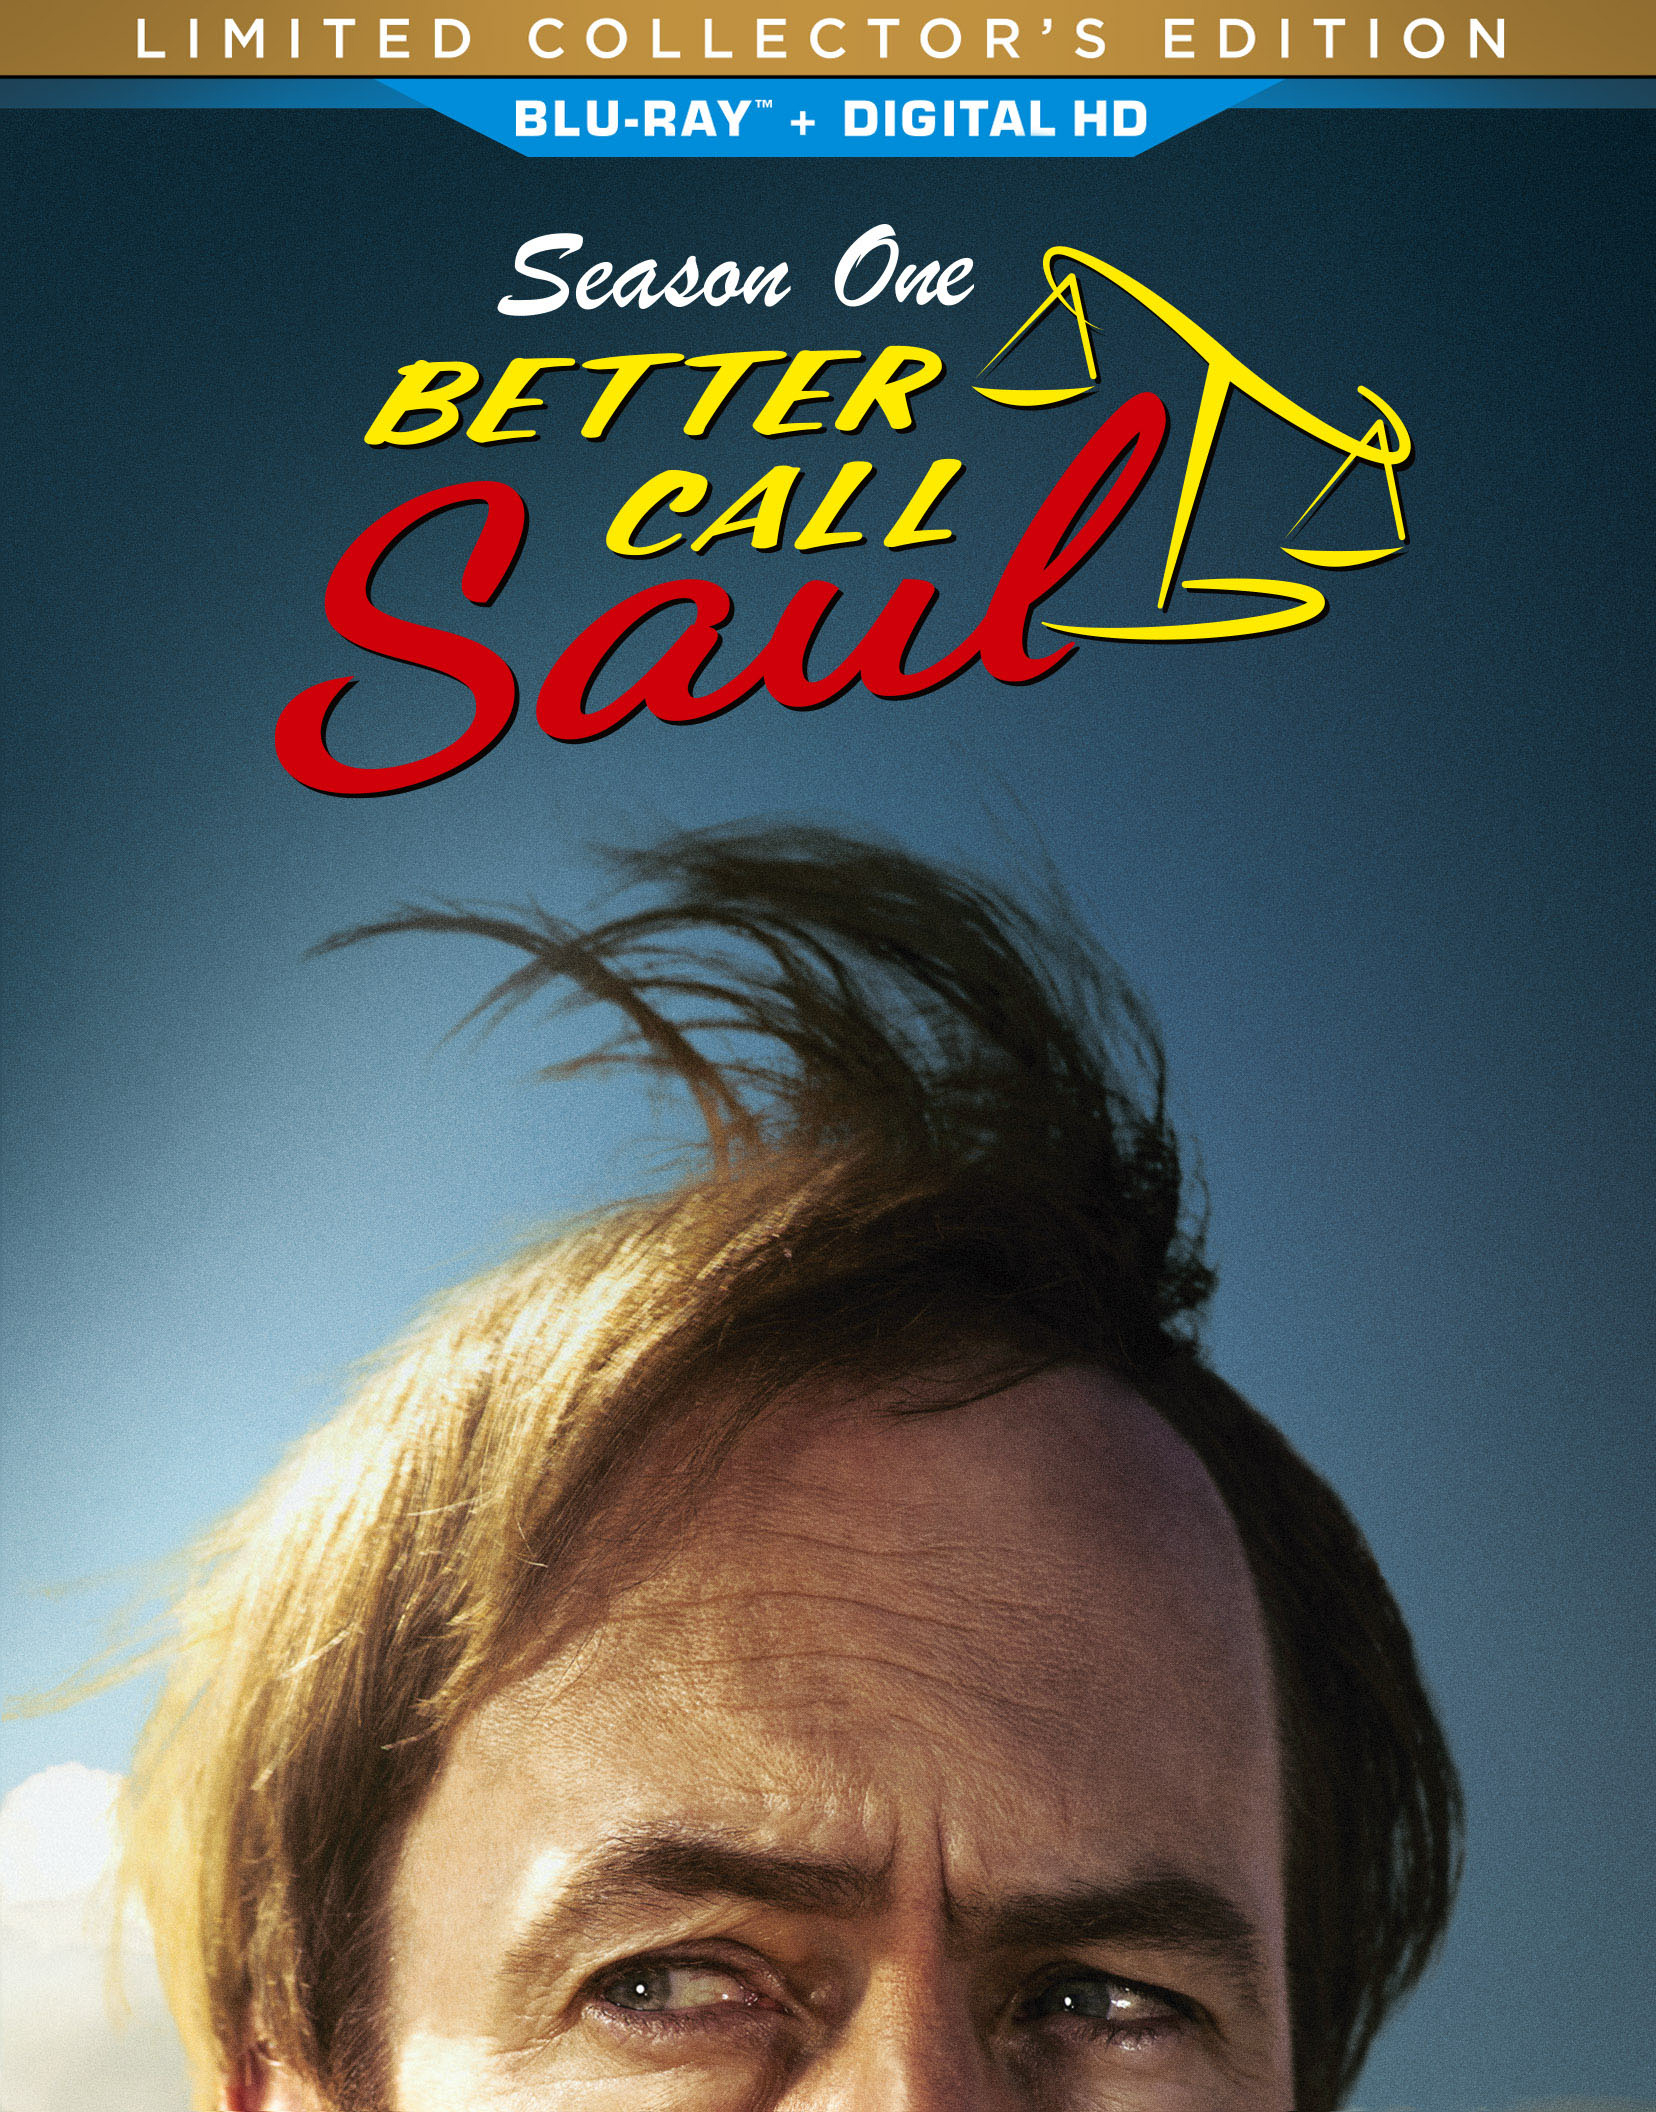 Better Call Saul: Season One [Collector's Edition] [Blu-ray] - Best Buy